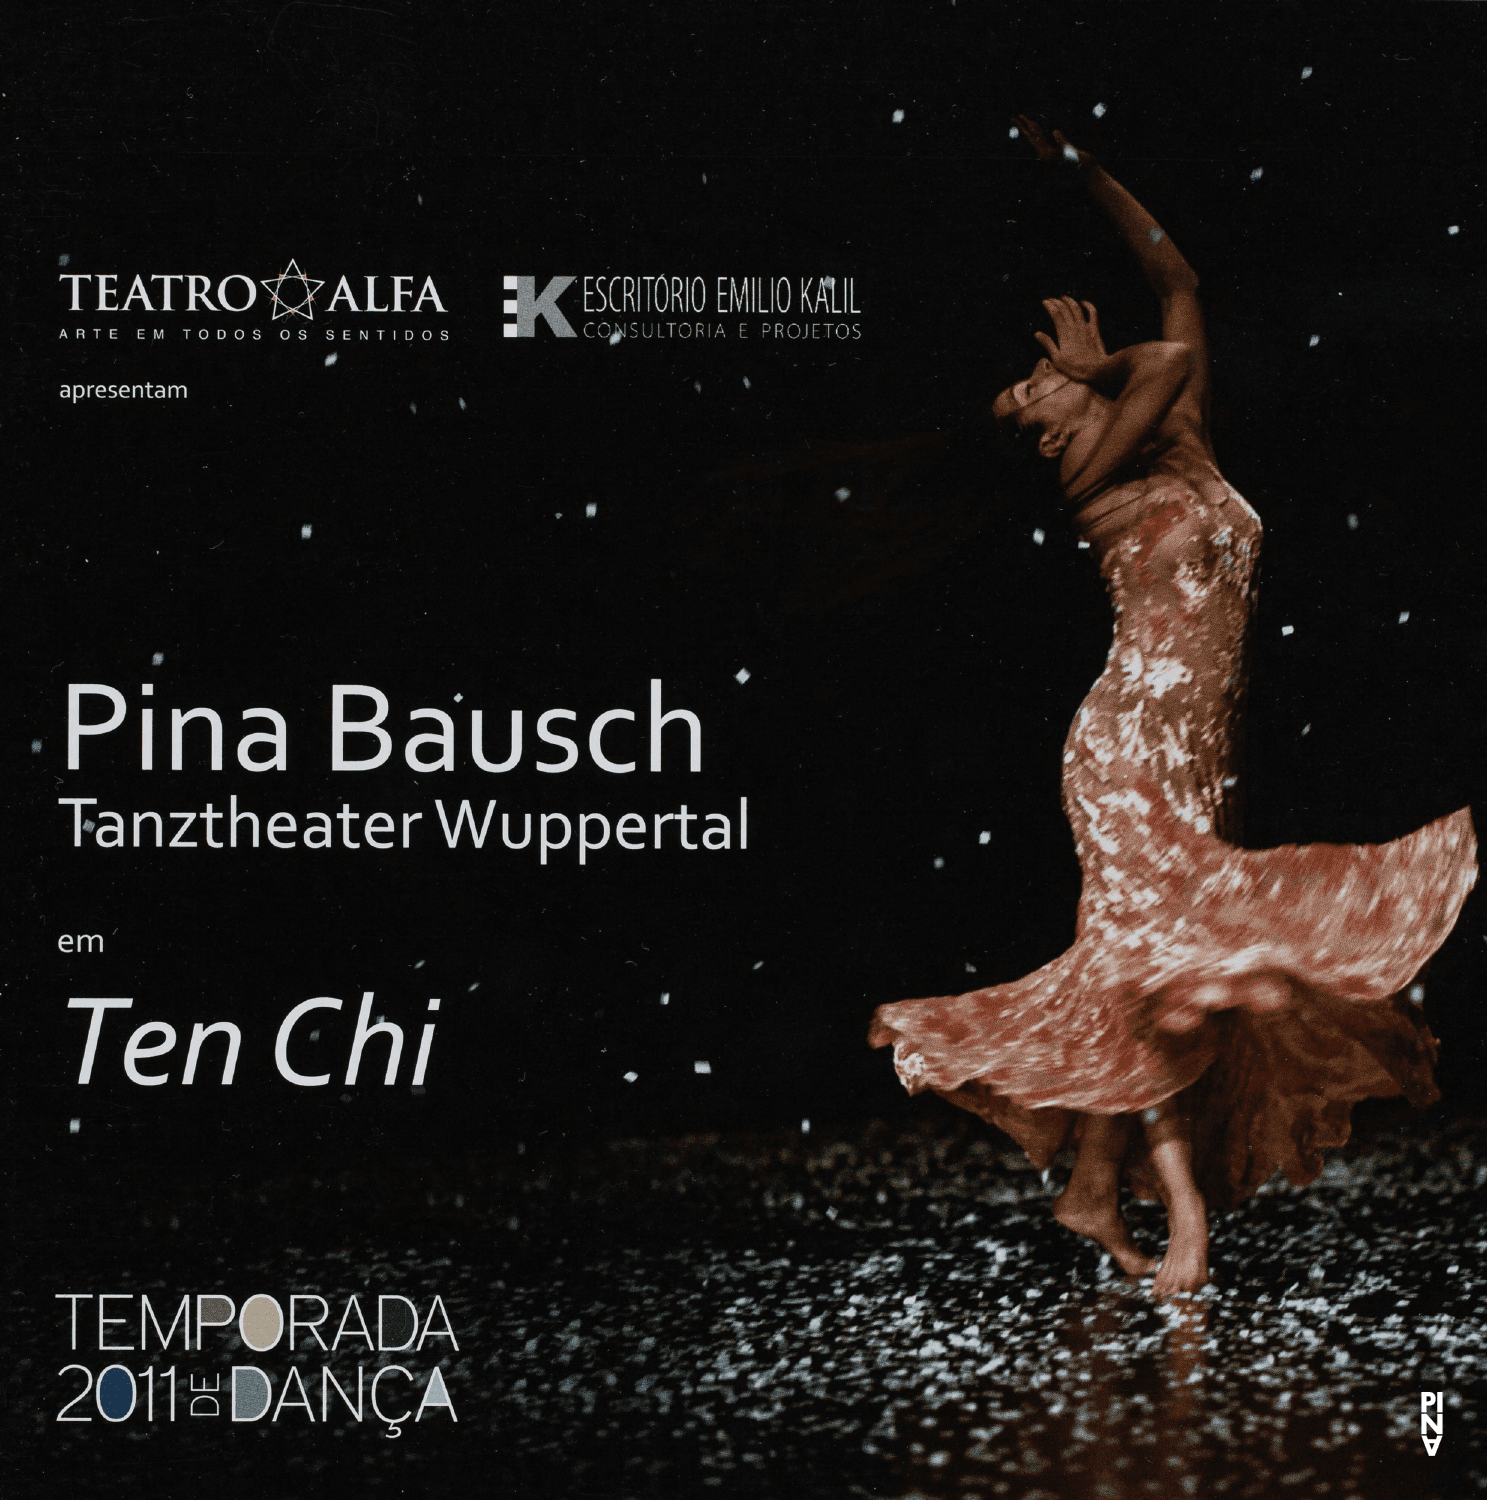 Booklet for “Ten Chi” by Pina Bausch with Tanztheater Wuppertal in in São Paulo, 04/14/2011 – 04/19/2011